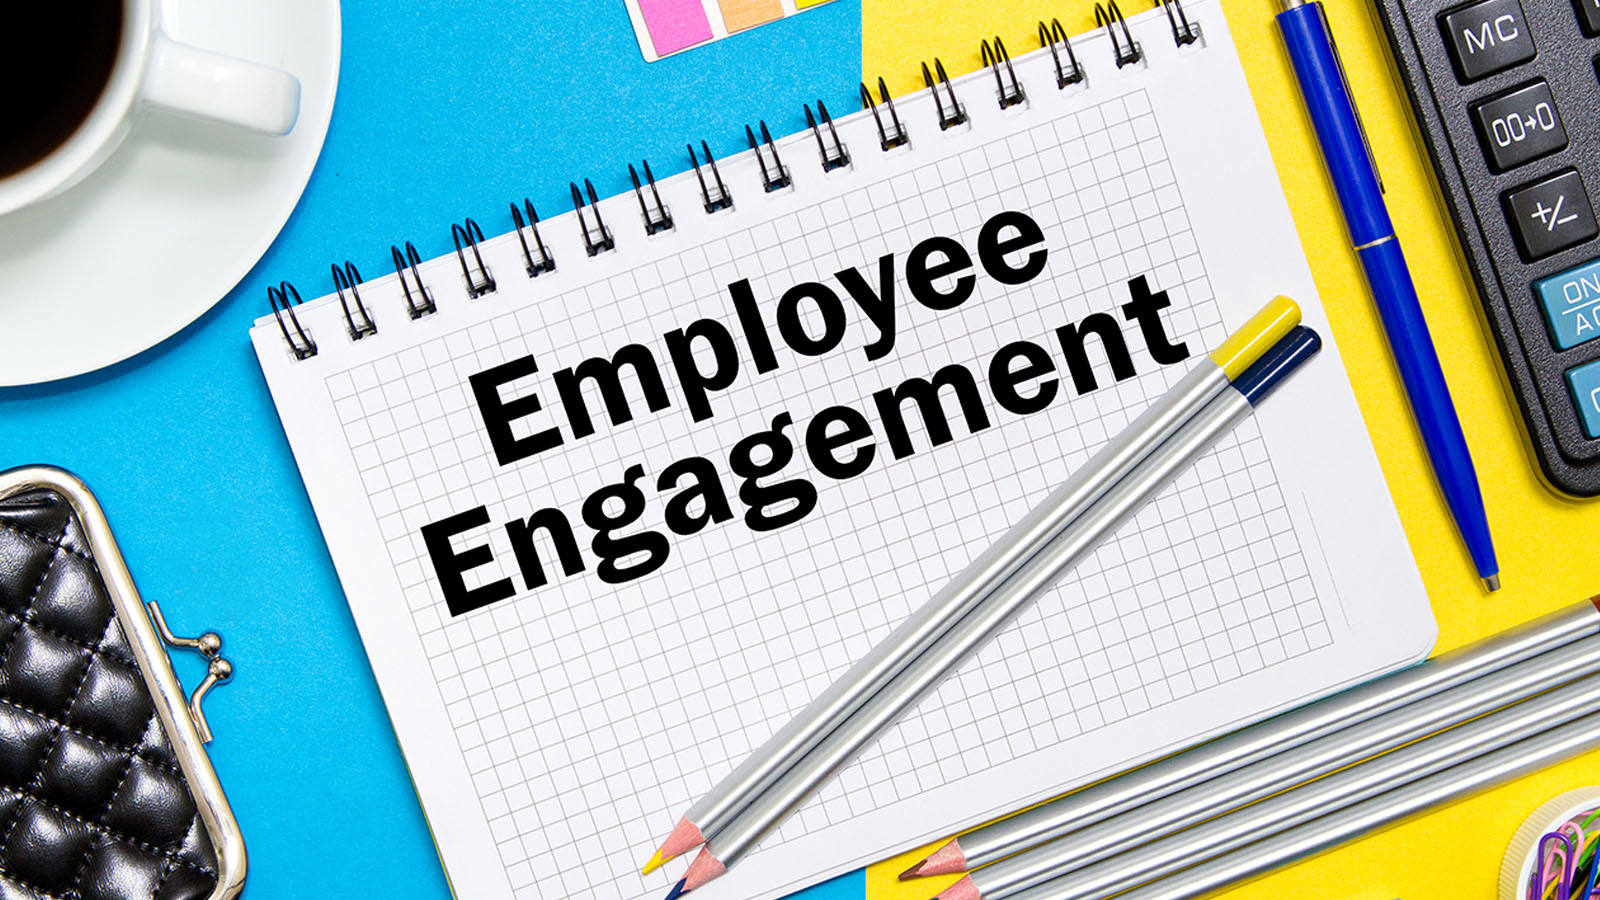 Turning the tide through effective employee engagement - Reputation Today